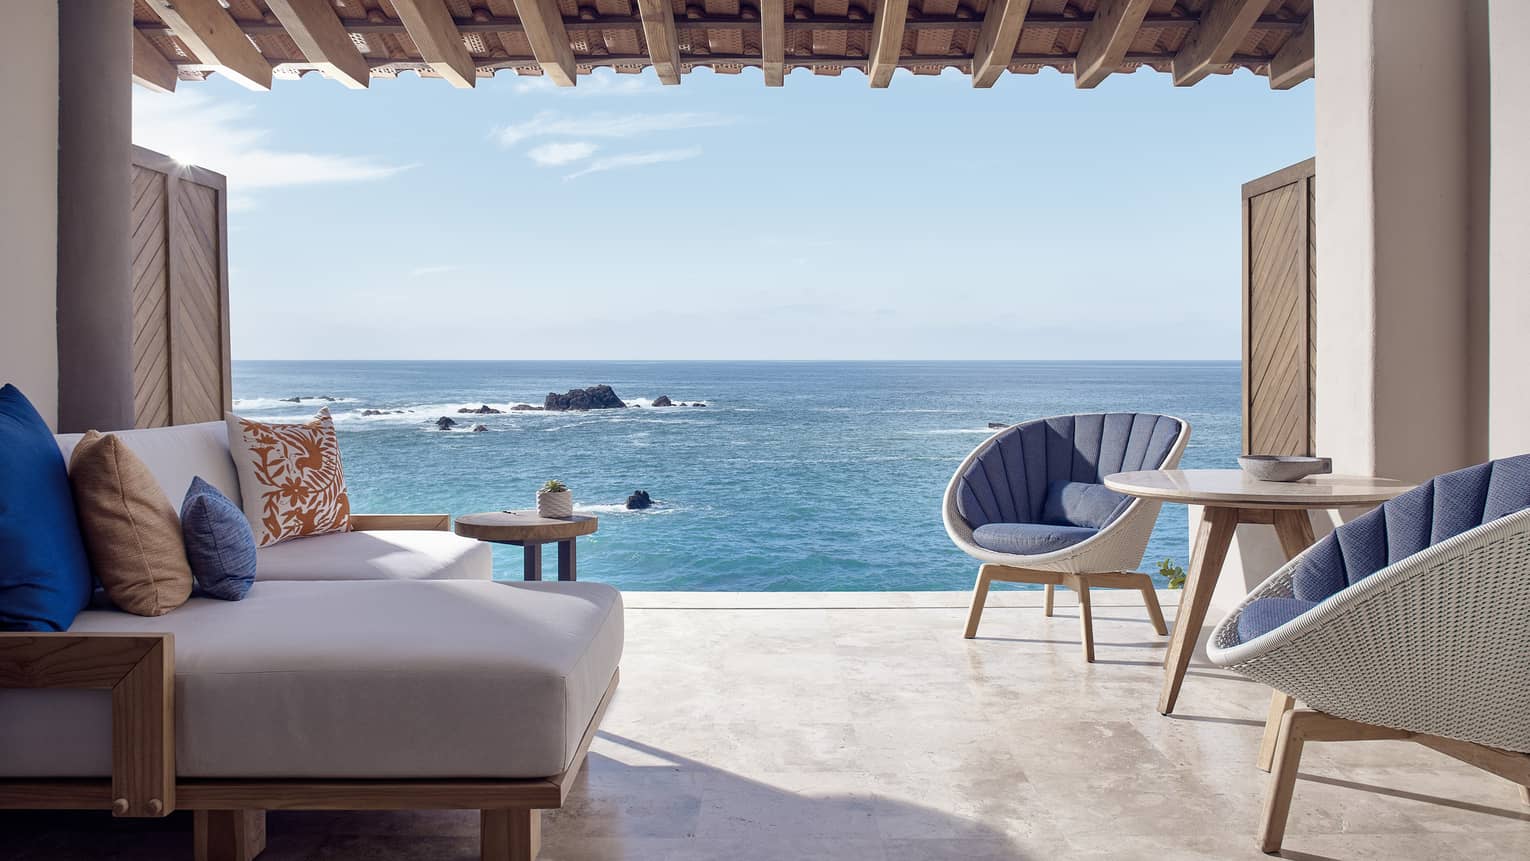 Sitting area with two chairs and one sofa, opening to the sea